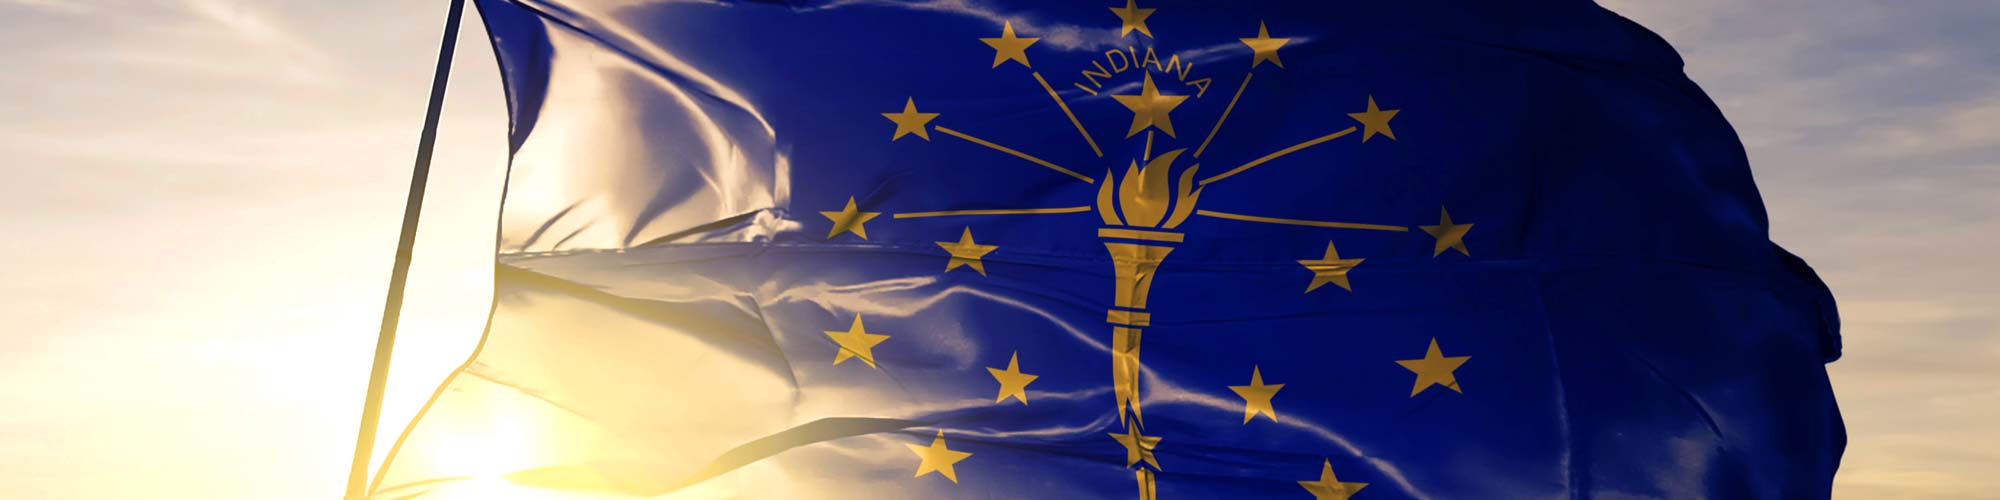 Indiana state flag at sunset